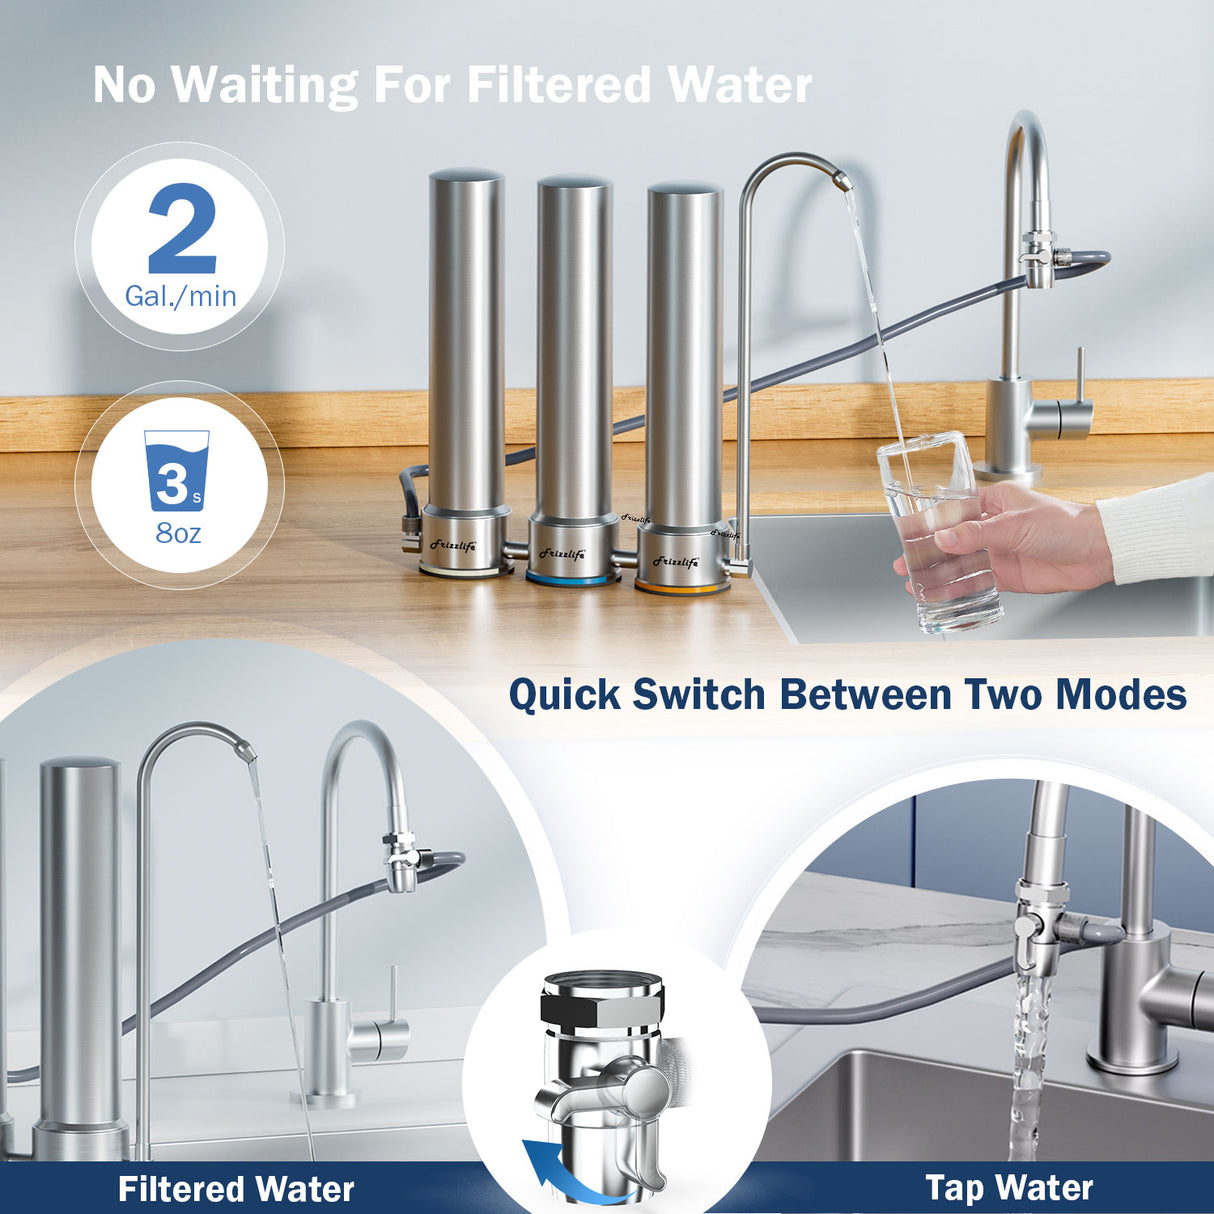 Frizzlife TS99 Countertop Water Filter System, 9-Stage Stainless Steel Faucet Water Filtration, 0.5 Micron NSF Certified Elements Reduces 99.99% Lead, Chlorine, Heavy Metals, Bad Taste & Odor